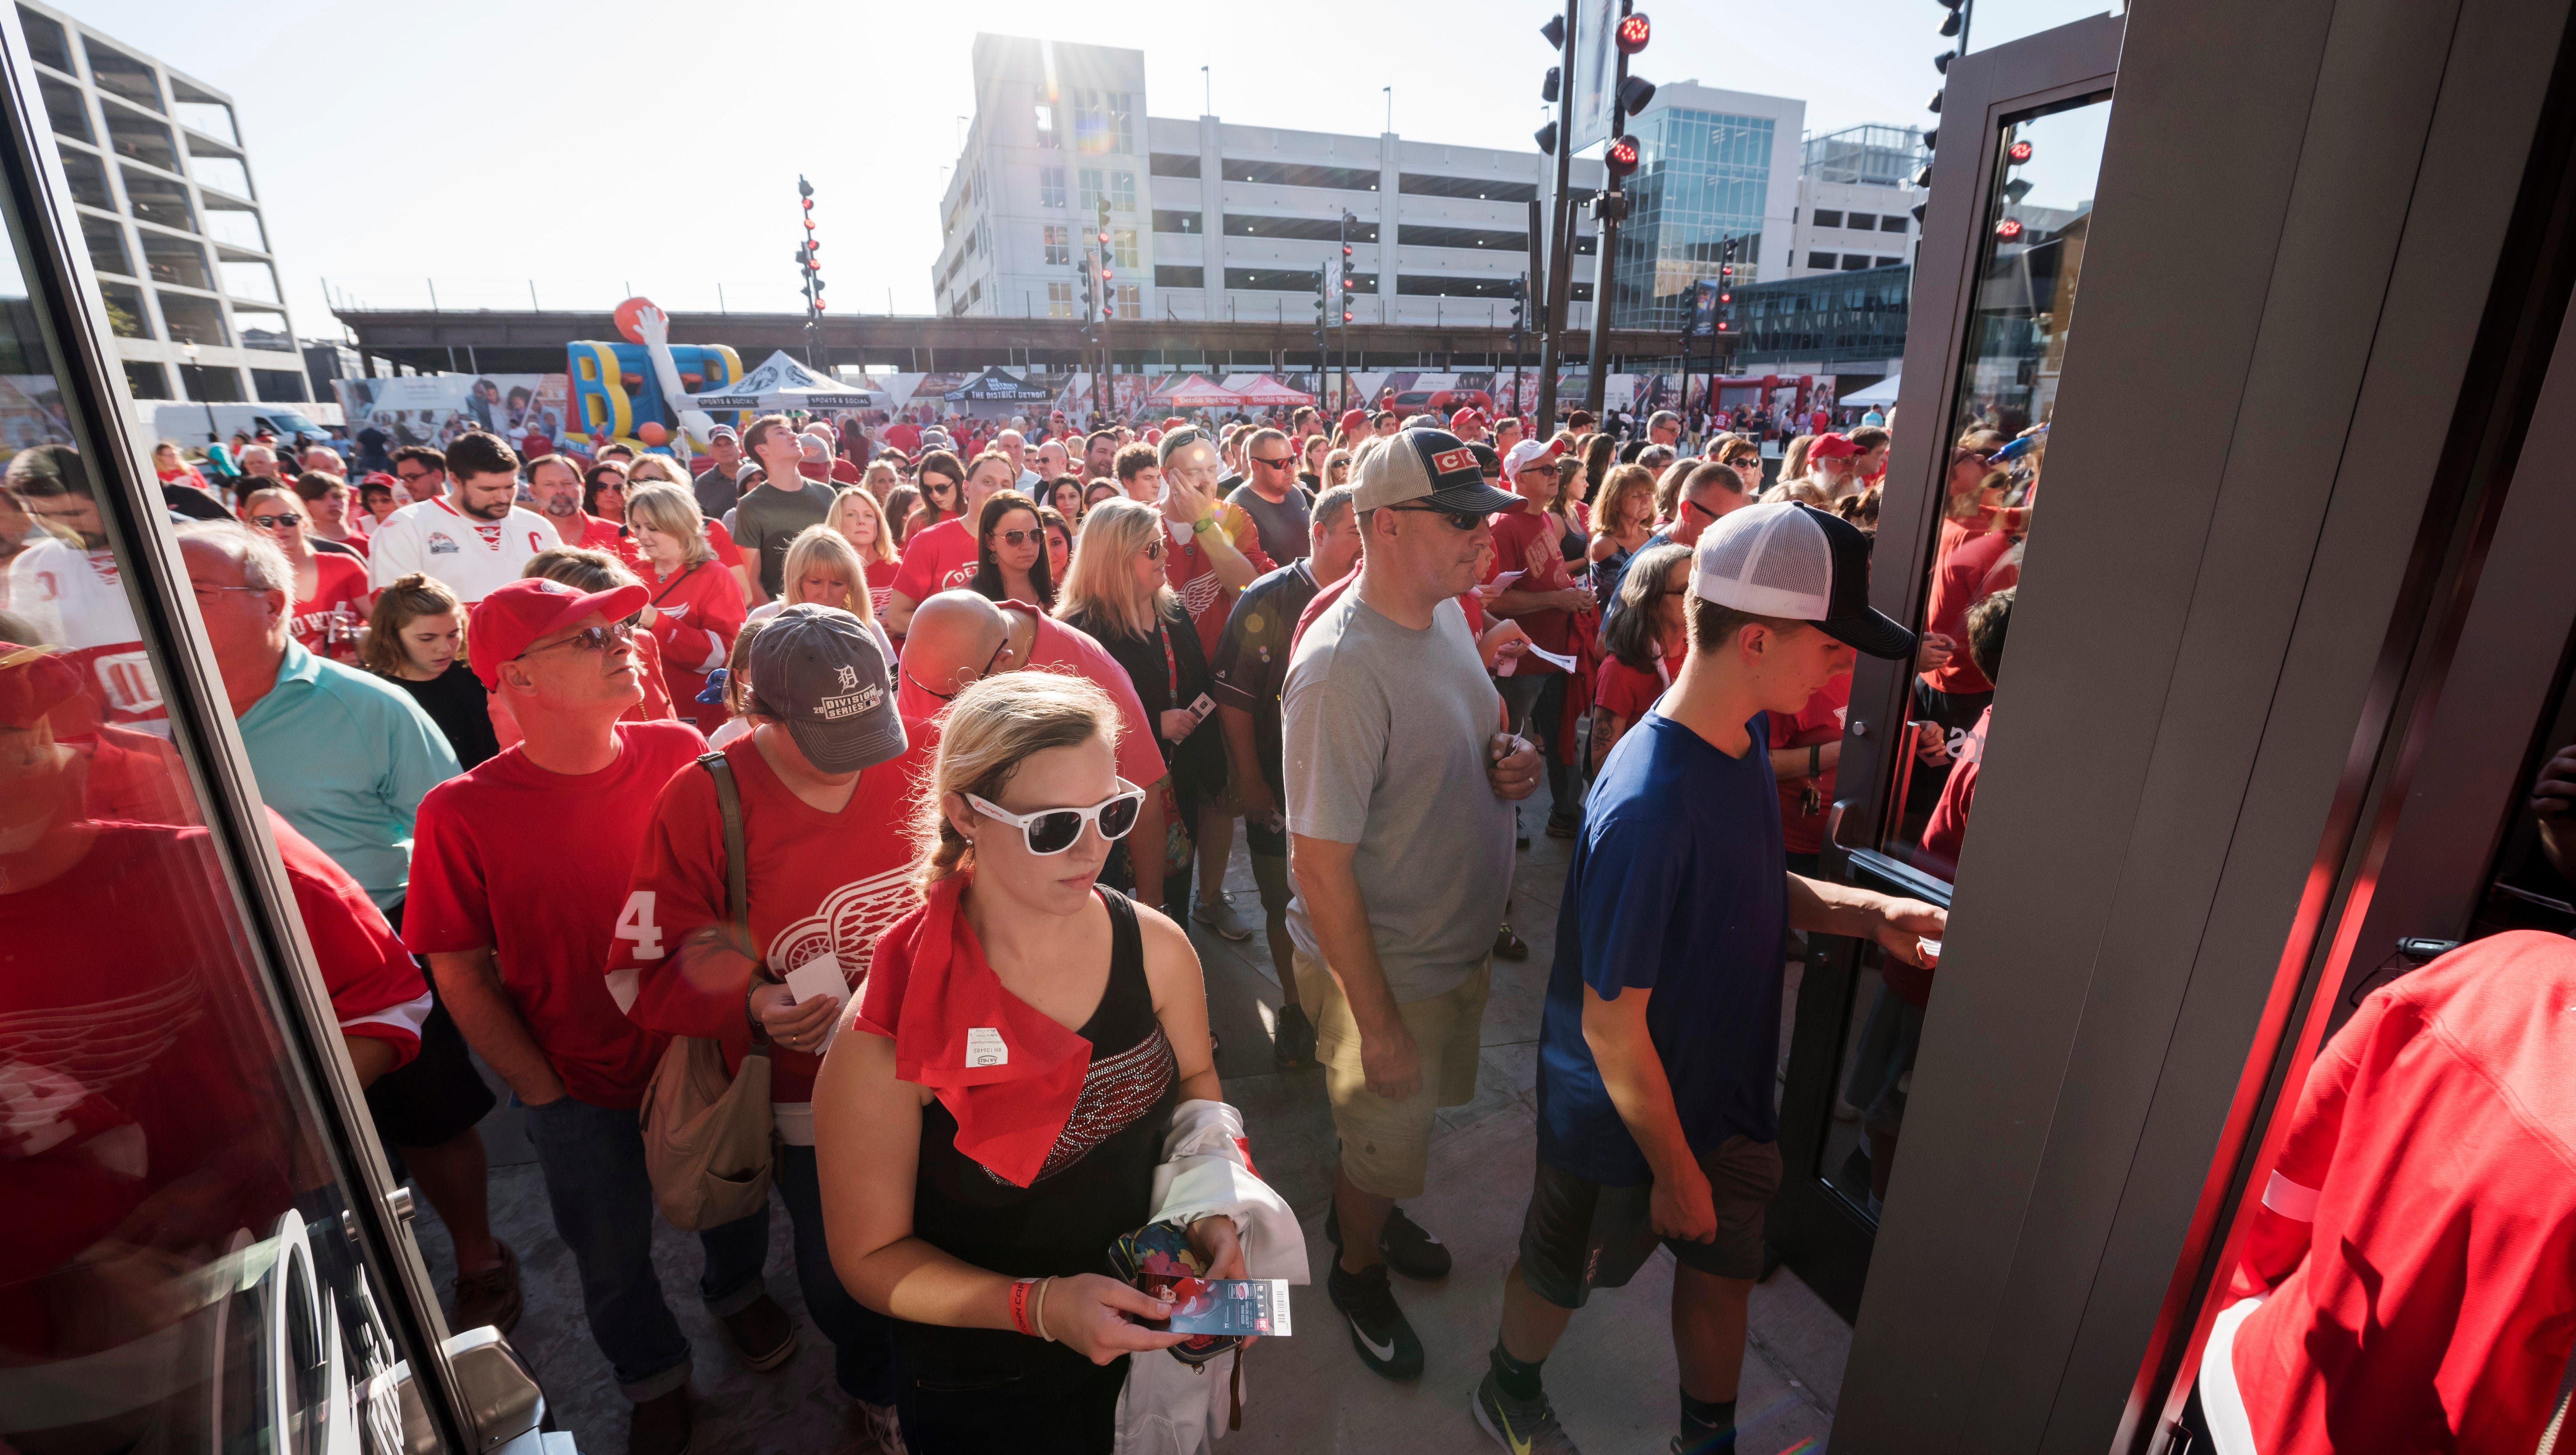 Red Wings fans stream into the Little Caesars Arena for the first-ever hockey game played there, a preseason game against the Boston Bruins stadium.